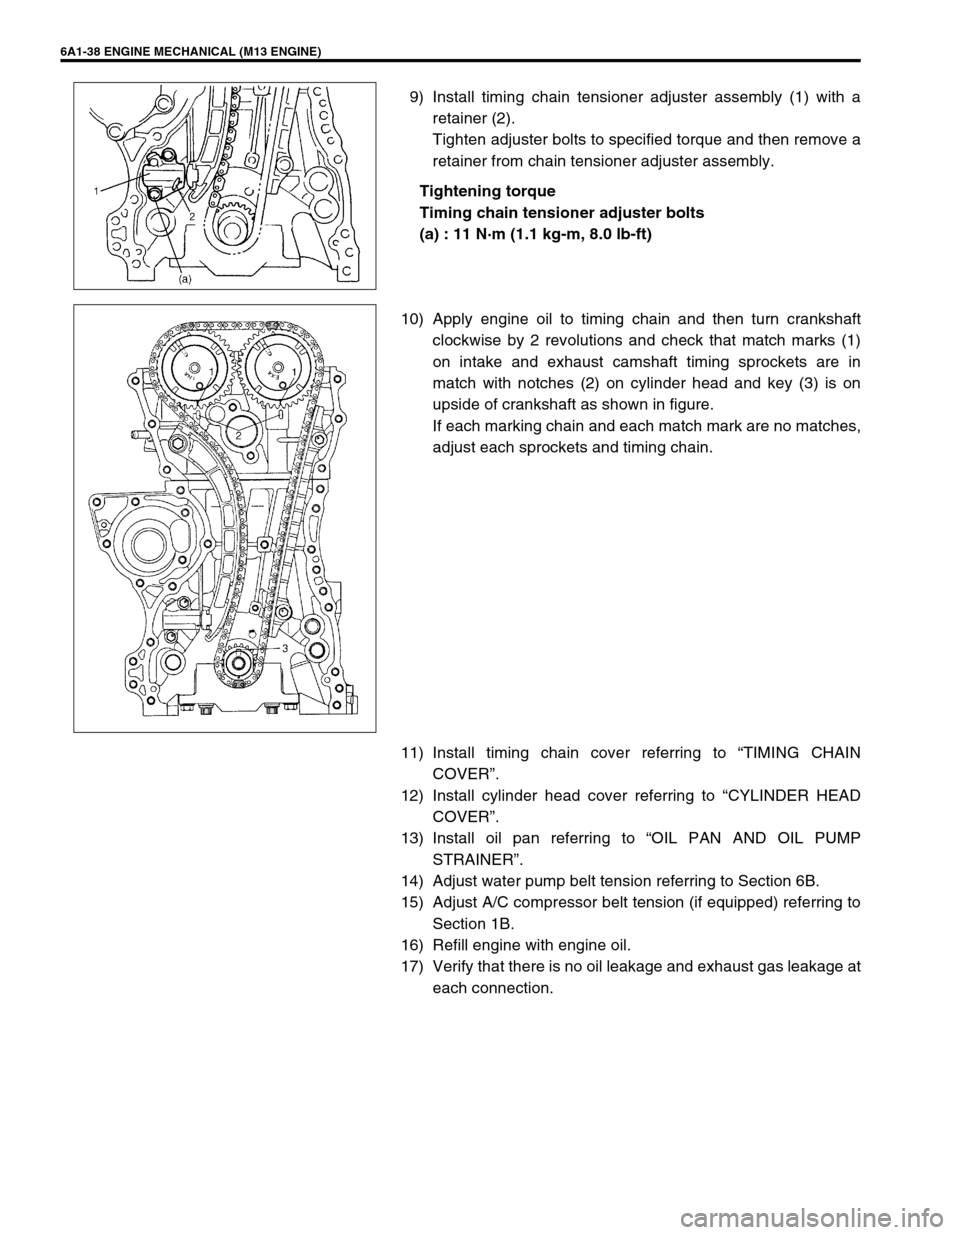 SUZUKI SWIFT 2000 1.G RG413 Service Workshop Manual 6A1-38 ENGINE MECHANICAL (M13 ENGINE)
9) Install timing chain tensioner adjuster assembly (1) with a
retainer (2).
Tighten adjuster bolts to specified torque and then remove a
retainer from chain tens